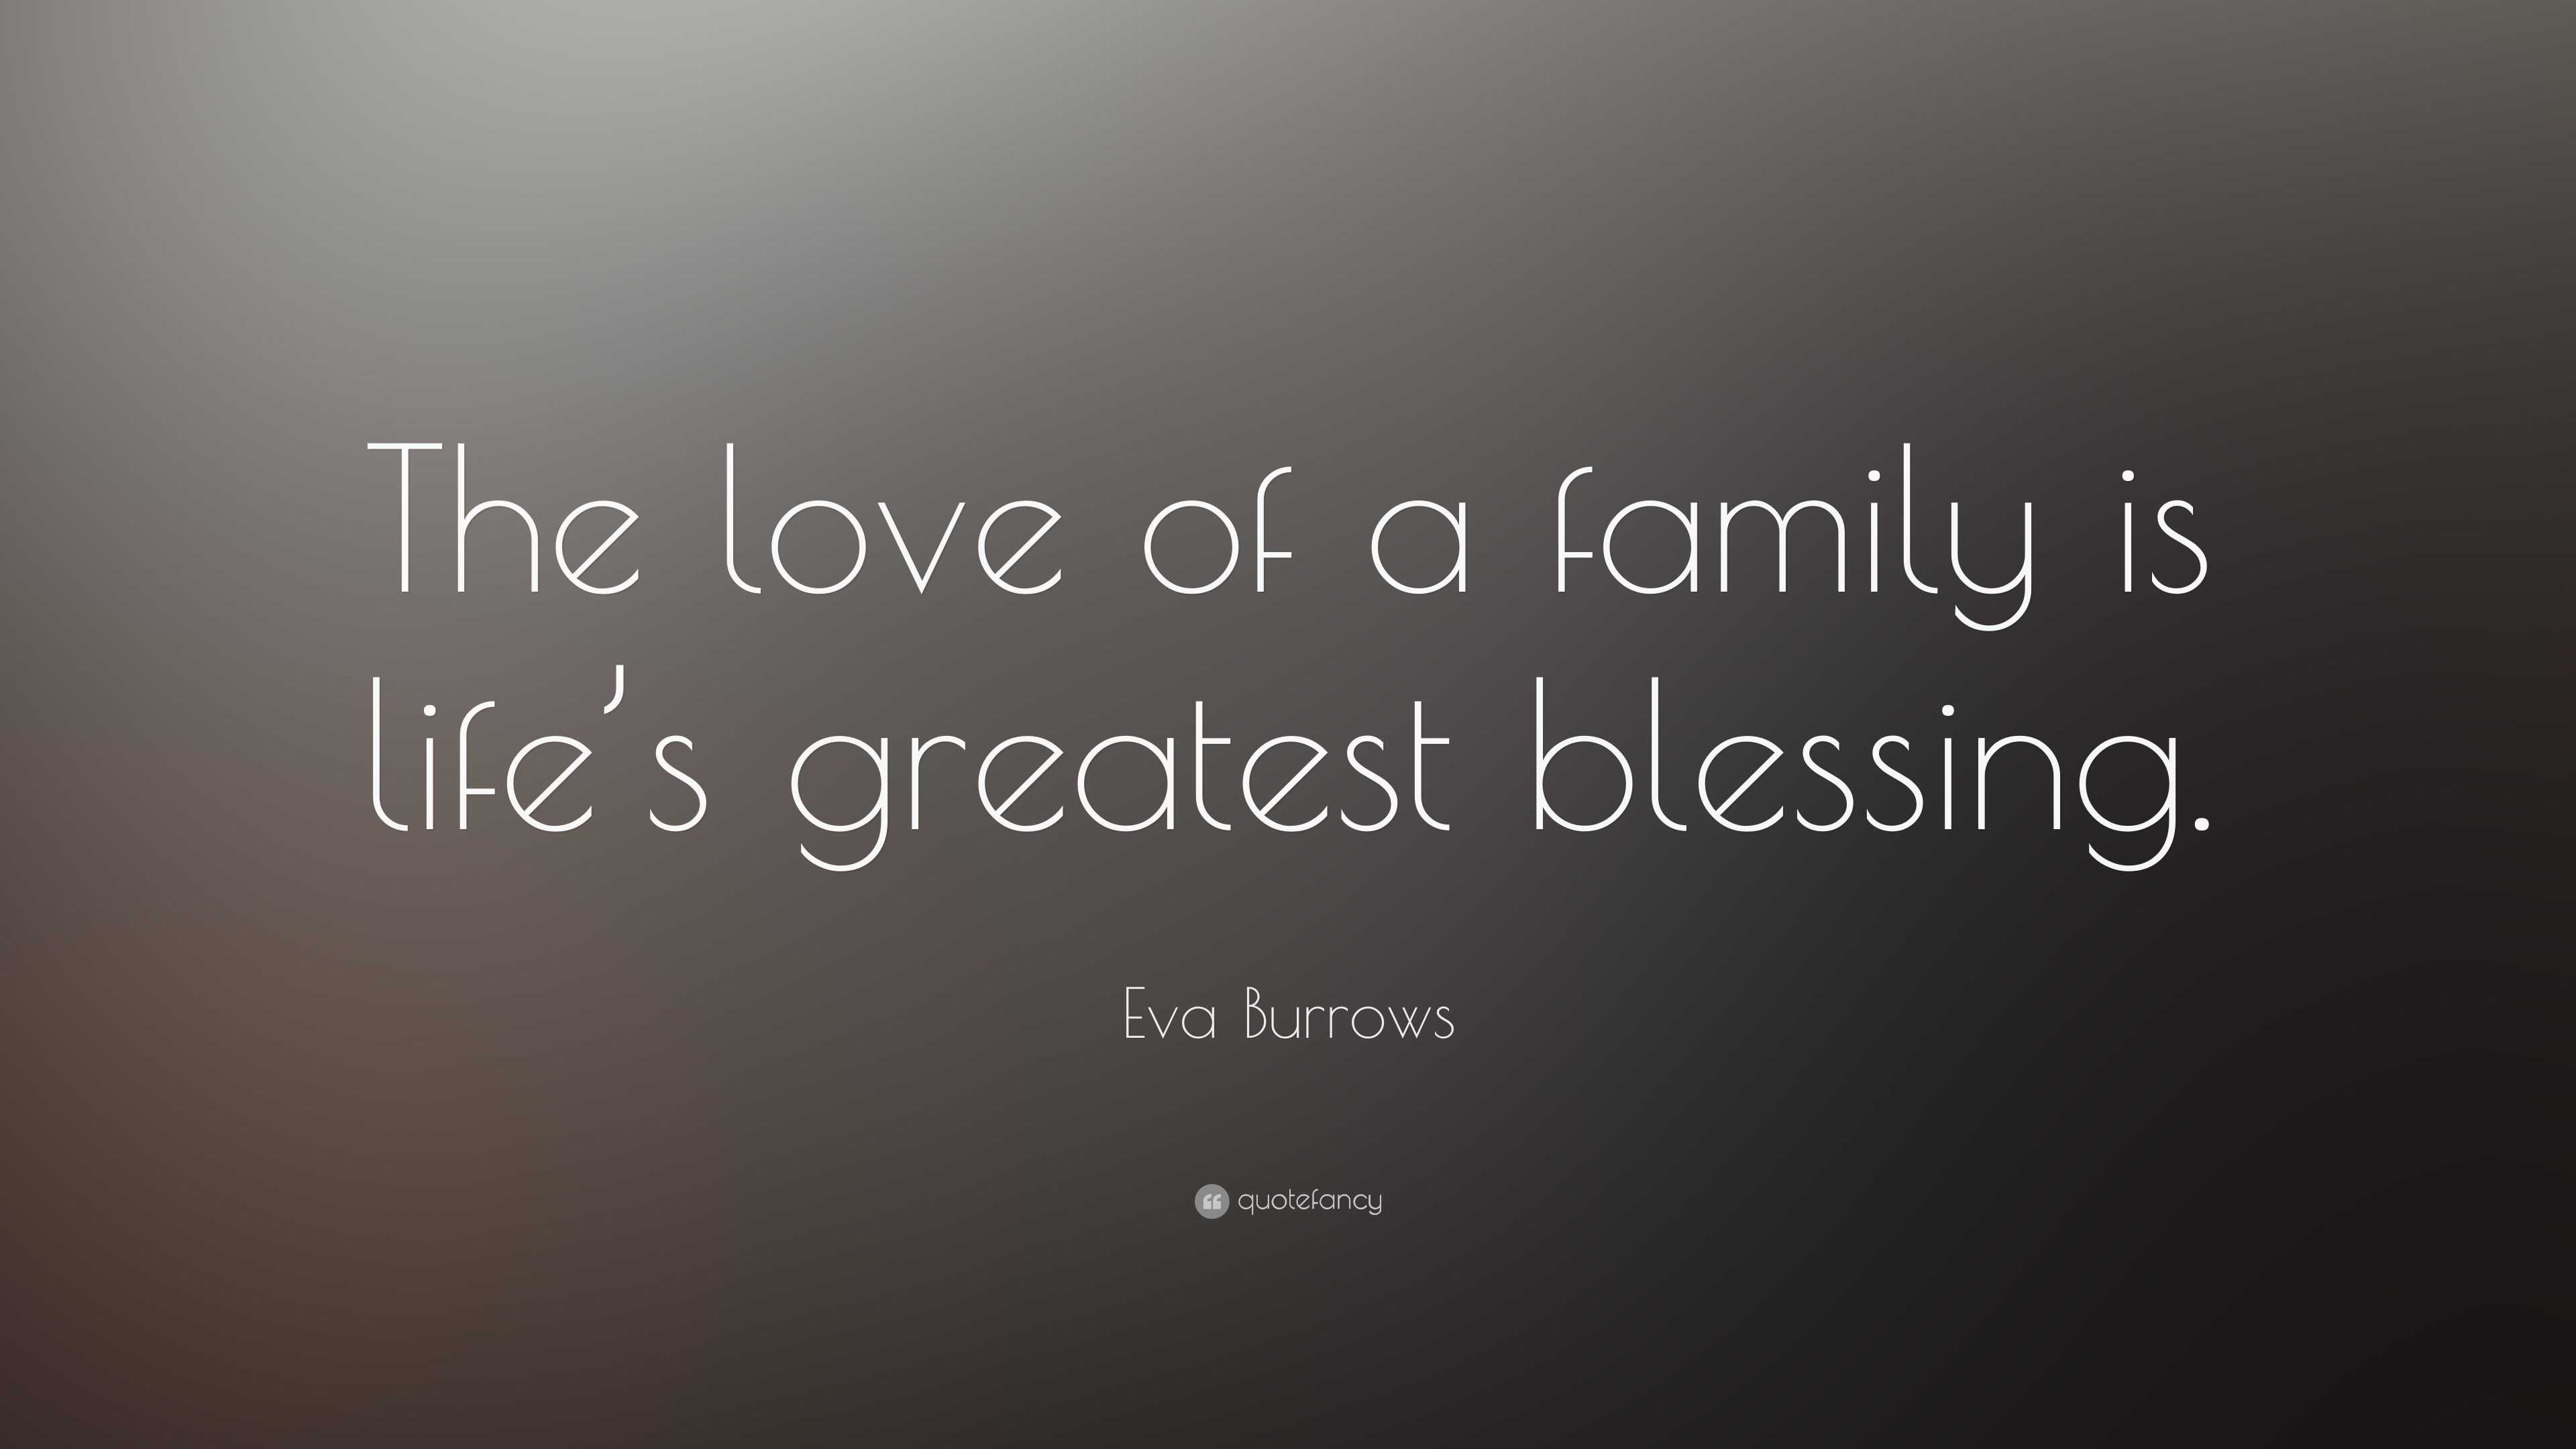 Eva Burrows Quote “The love of a family is life s greatest blessing ”